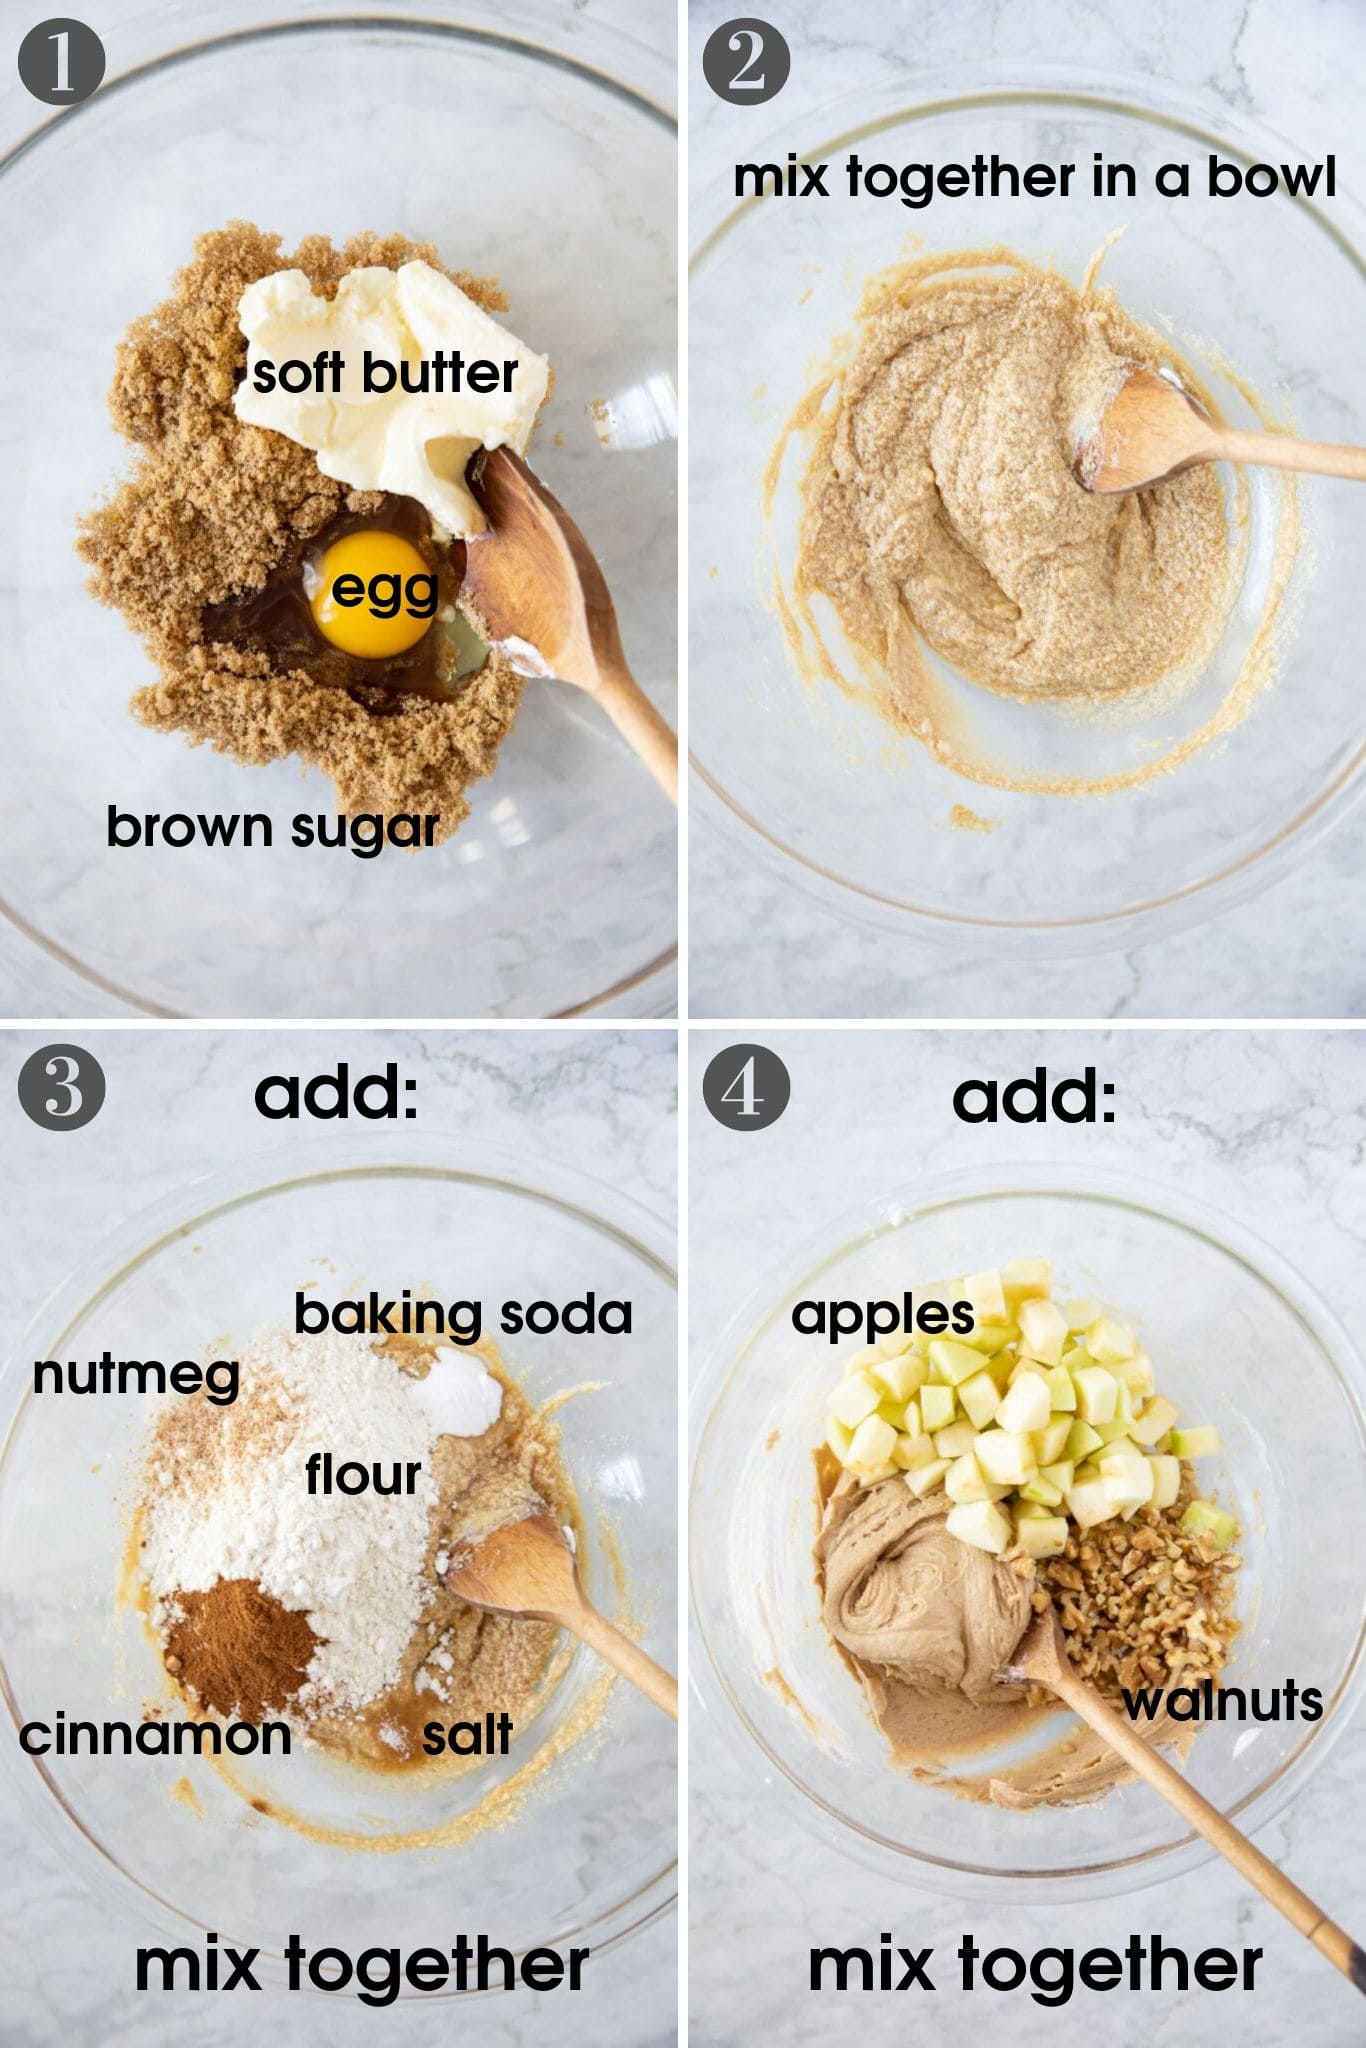 four photos showing steps to make apple walnut pie in one bowl, using butter, brown sugar, egg, flour, baking soda, spices, apples and walnuts